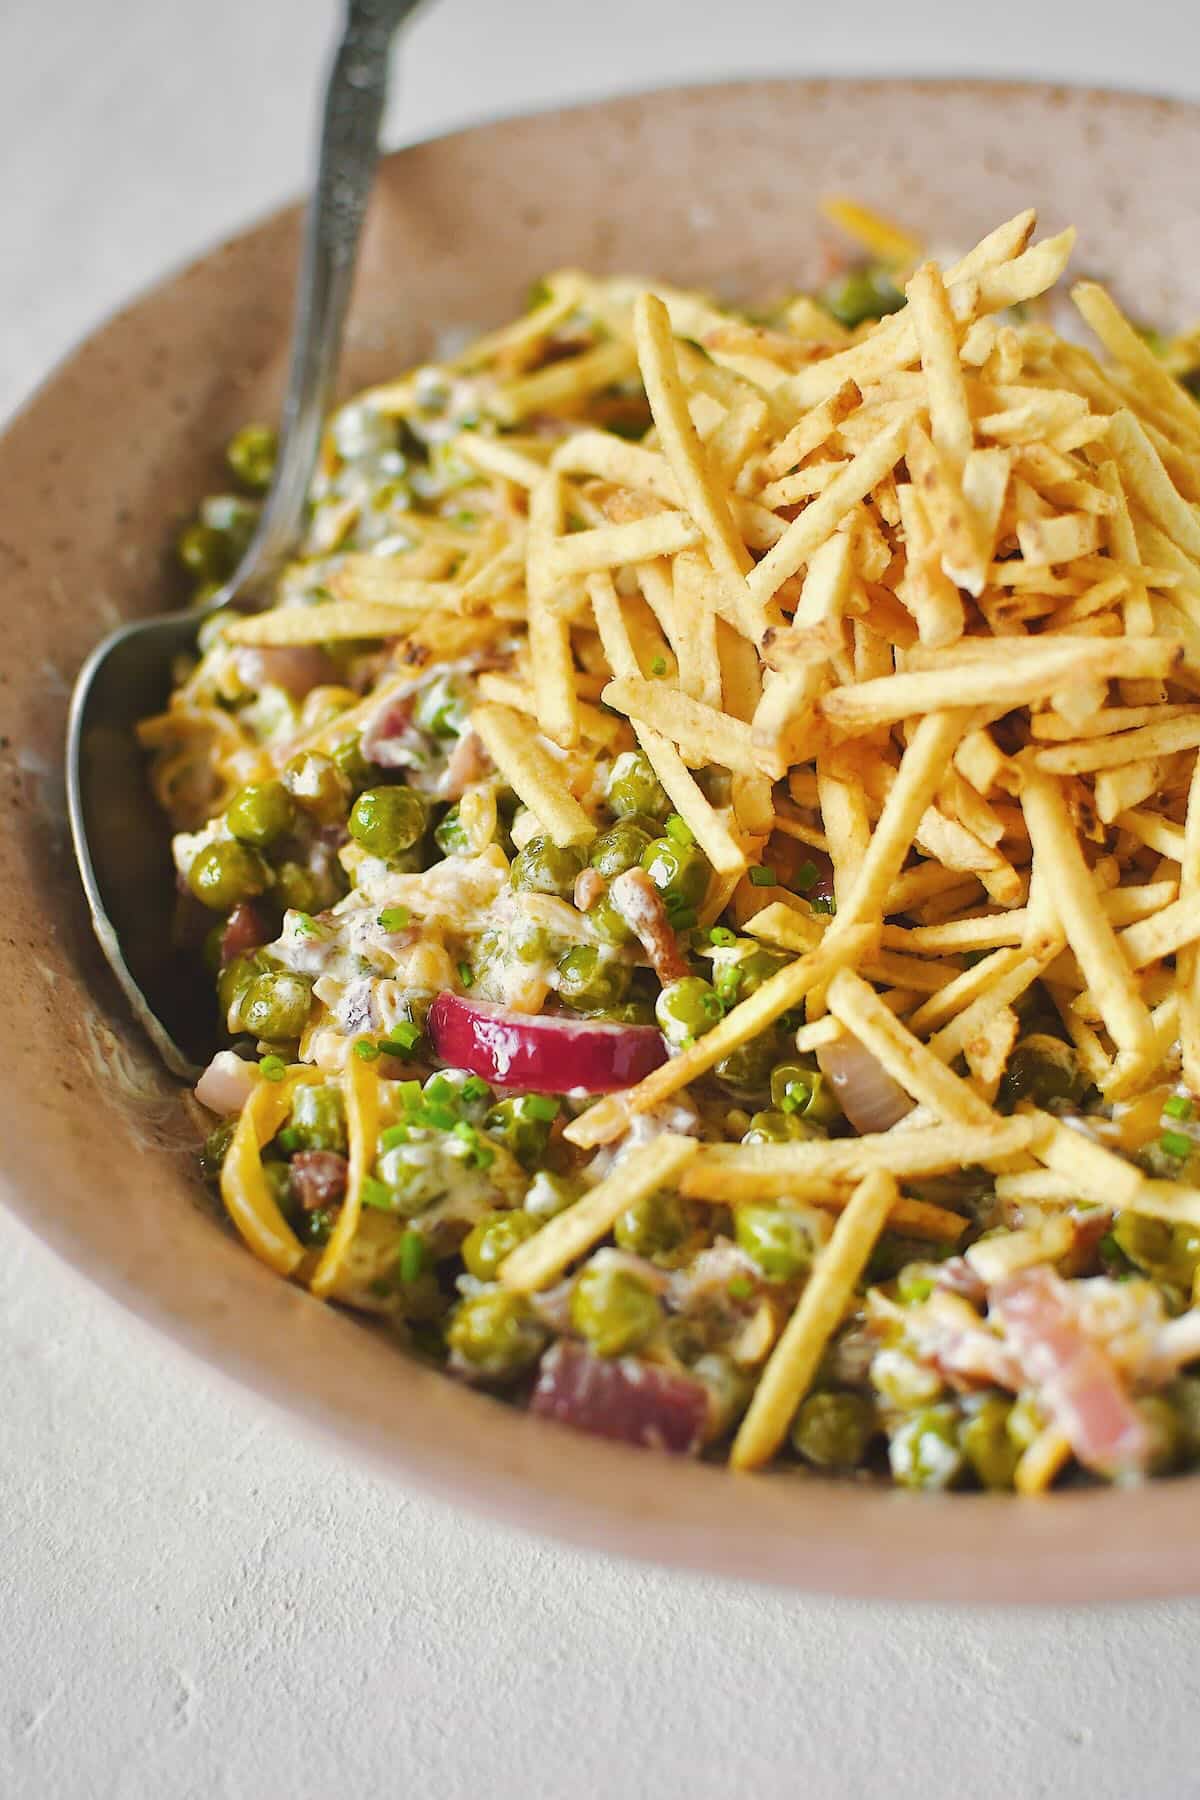 Bacon Pea Salad tossed together in a bowl and topped with shoestring potatoes.